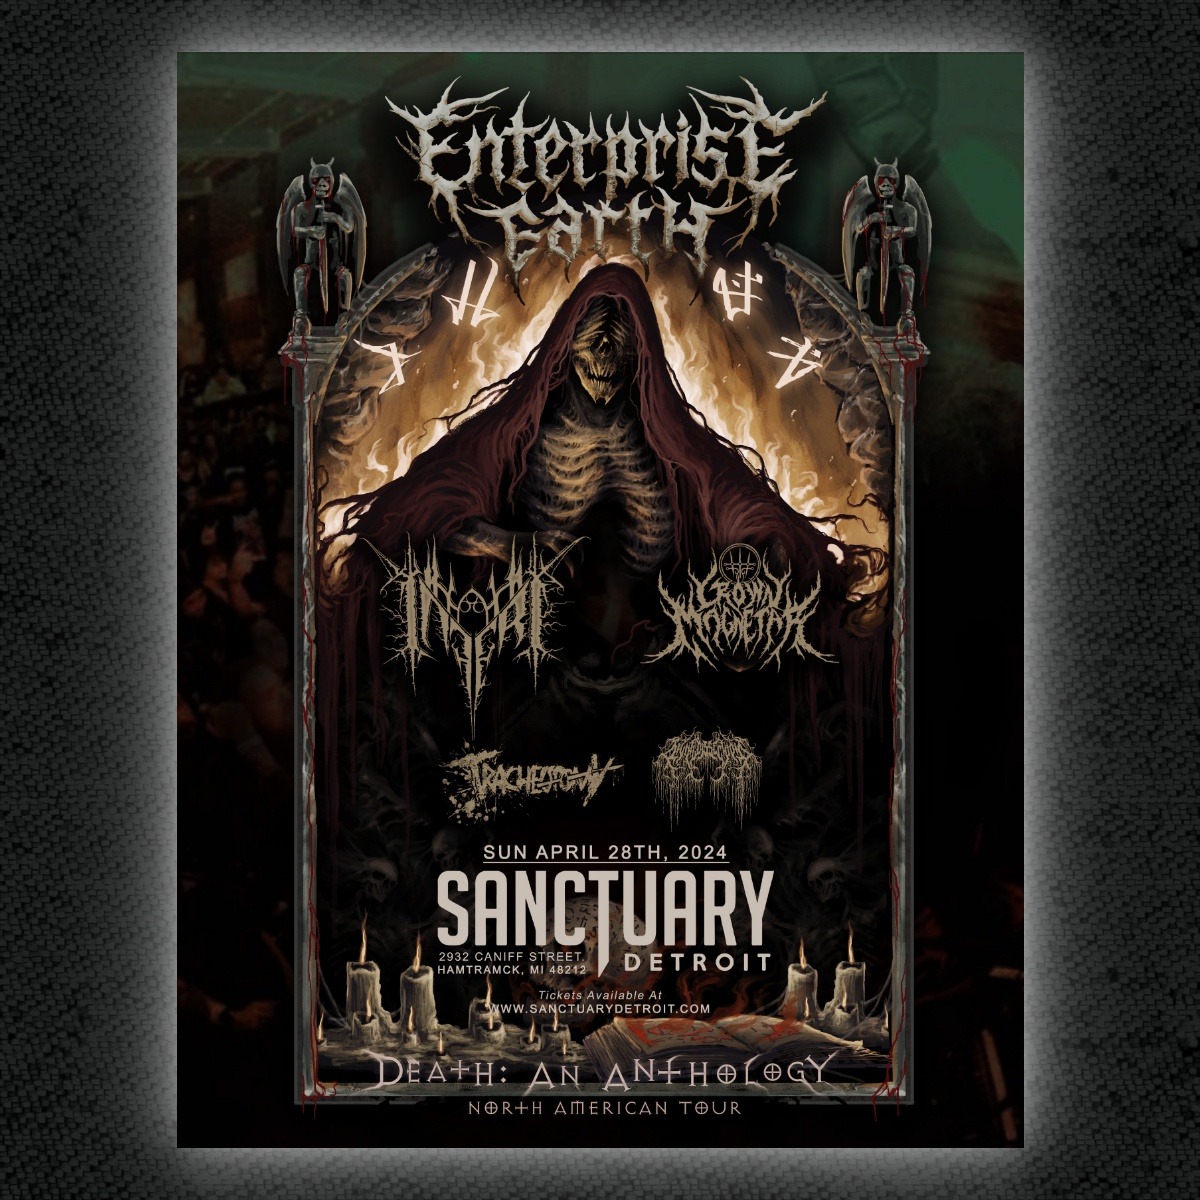 TONIGHT! Enterprise Earth returns to The Sanctuary with special guests Inferi, Crown Magnetar, Tracheotomy and Living Dissection !! Doors at 6pm - grab your tickets at sanctuarydetroit.com